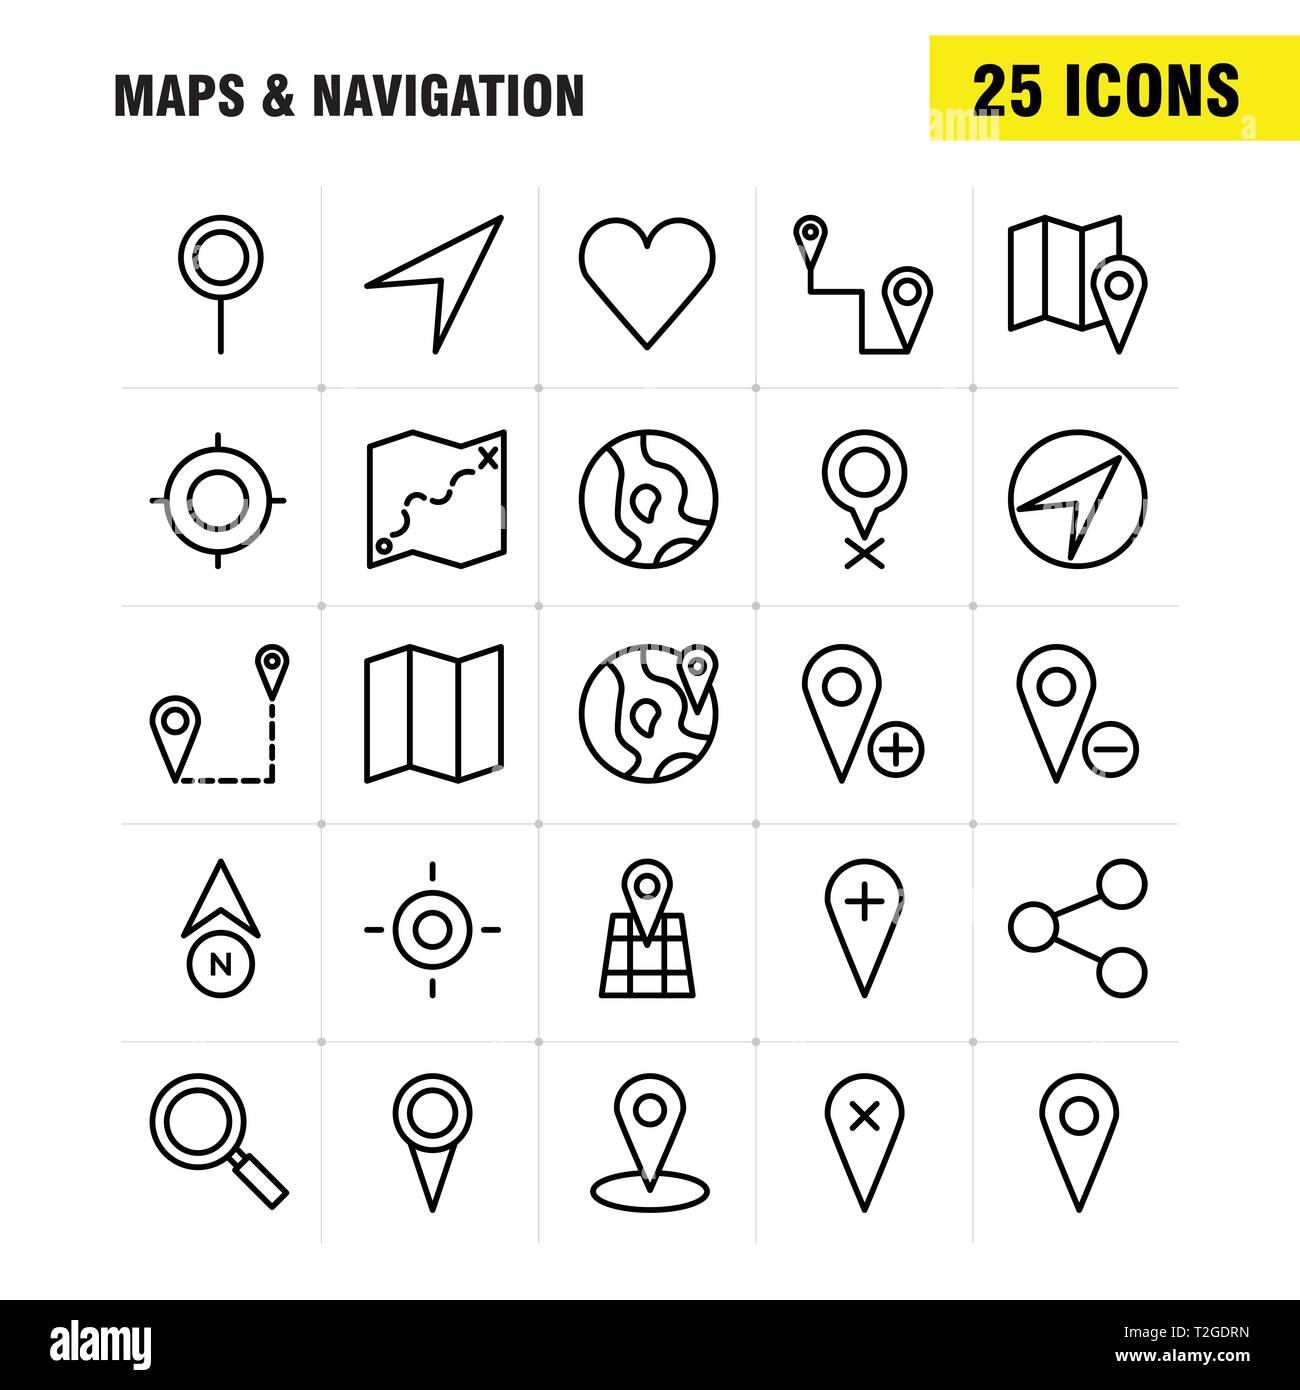 Maps And Navigation Line Icon Pack For Designers And Developers. Icons ...